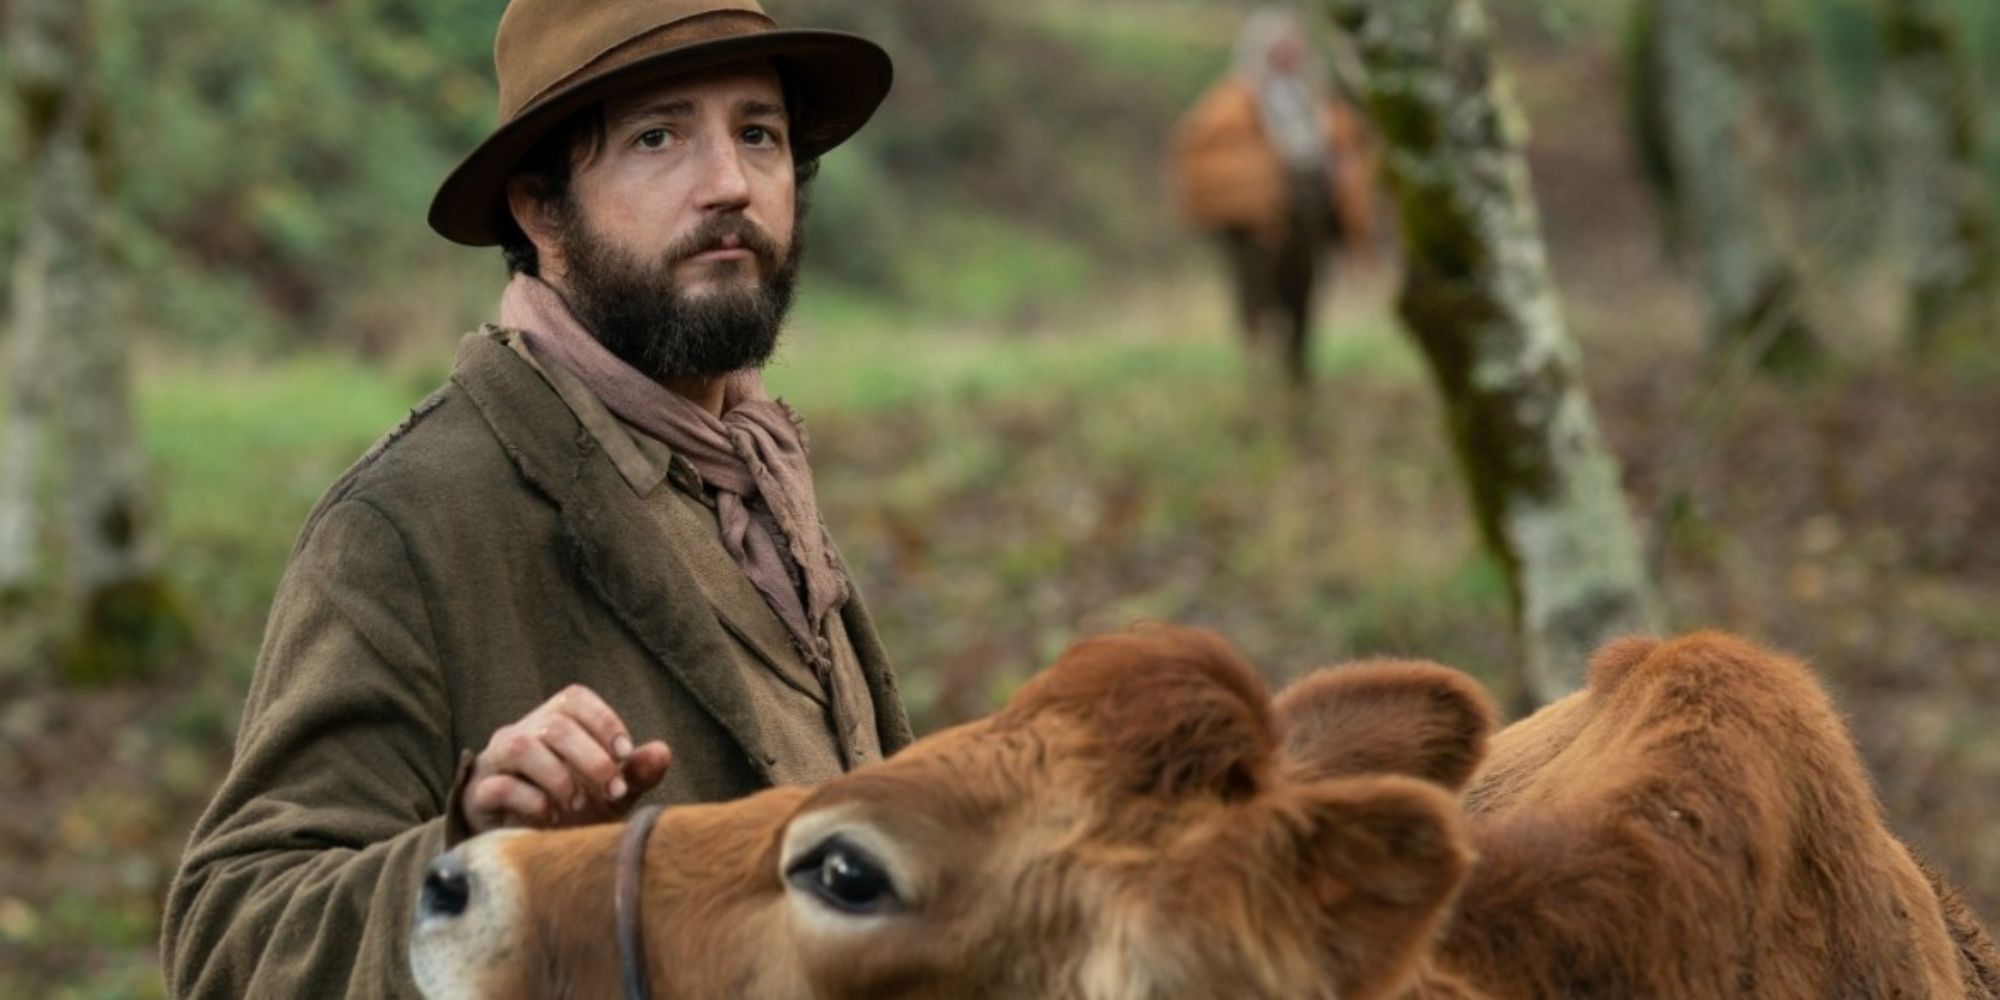 John Magaro as Cookie, petting a cow in First Cow